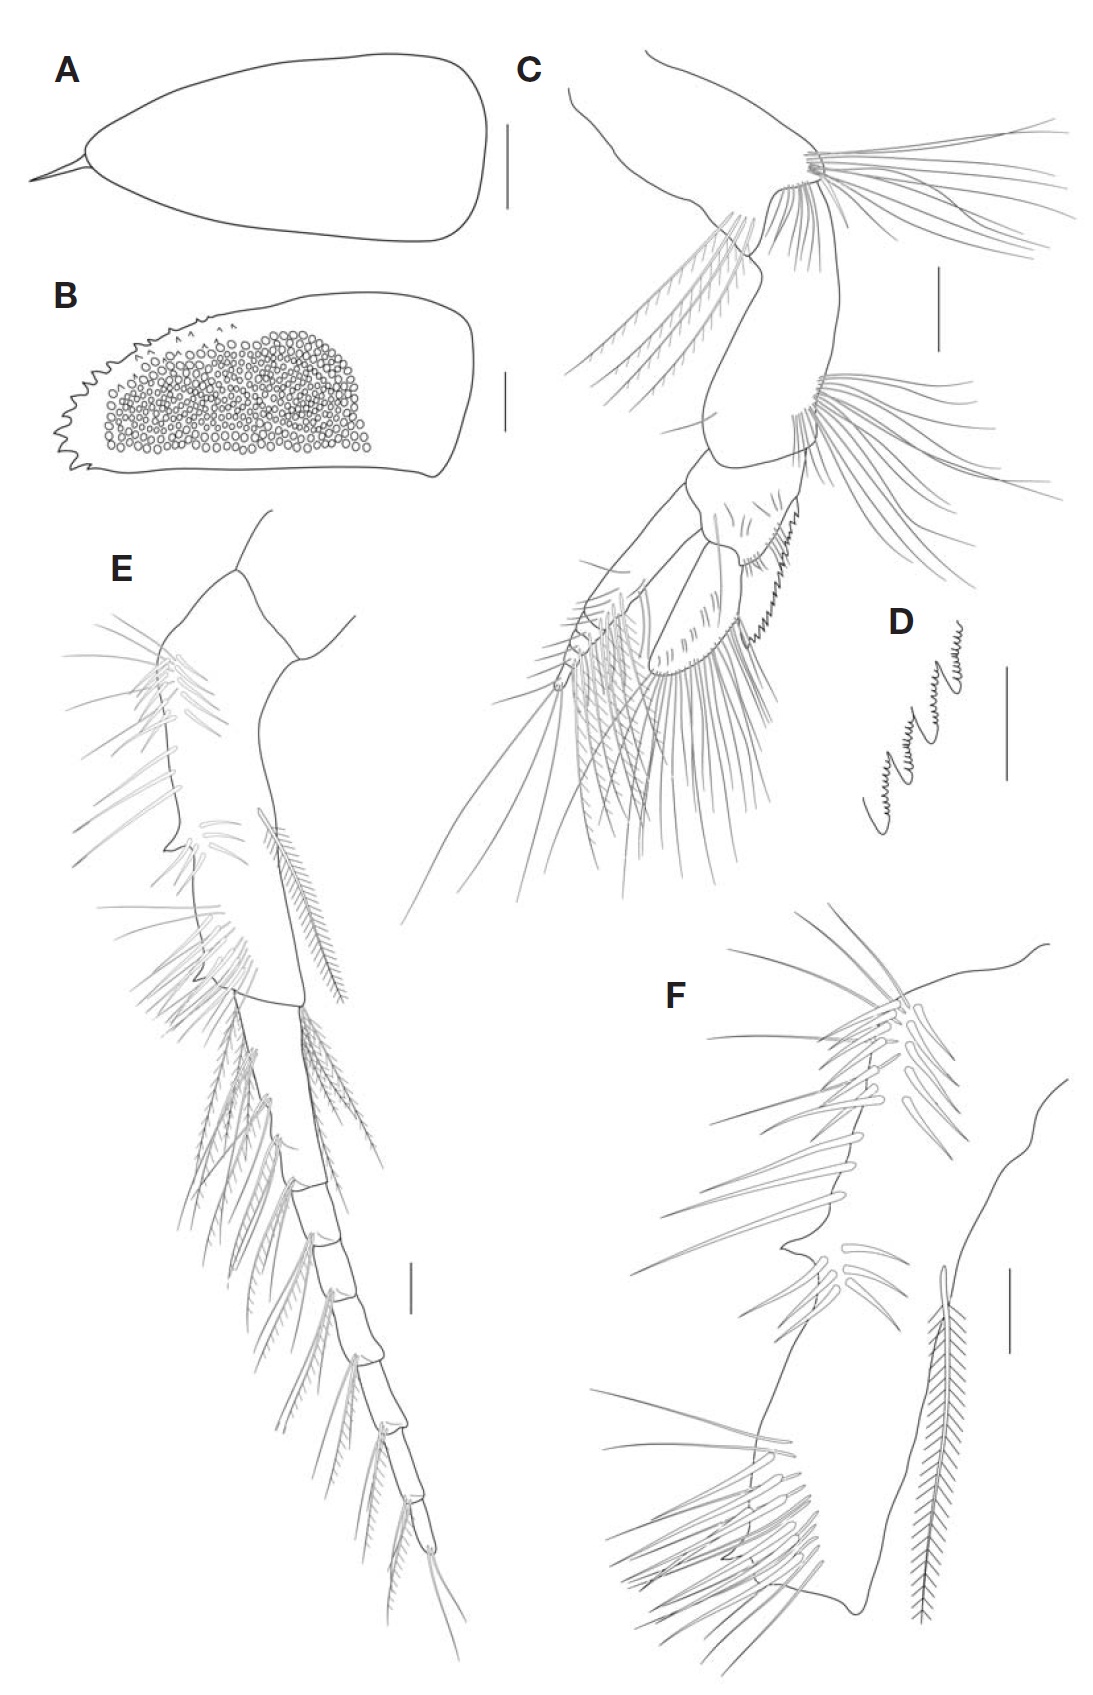 Paranebalia longipes, female. A, Rostrum, dorsal view; B, Eye, lateral view; C, Antennule, lateral view; D, Antennule fourth article, serration on denticles of flange; E, Antenna, lateral view; F, Antenna, third article, external side, lateral view. Scale bars: A, C, E=0.2 mm, B, D, F=0.1 mm.